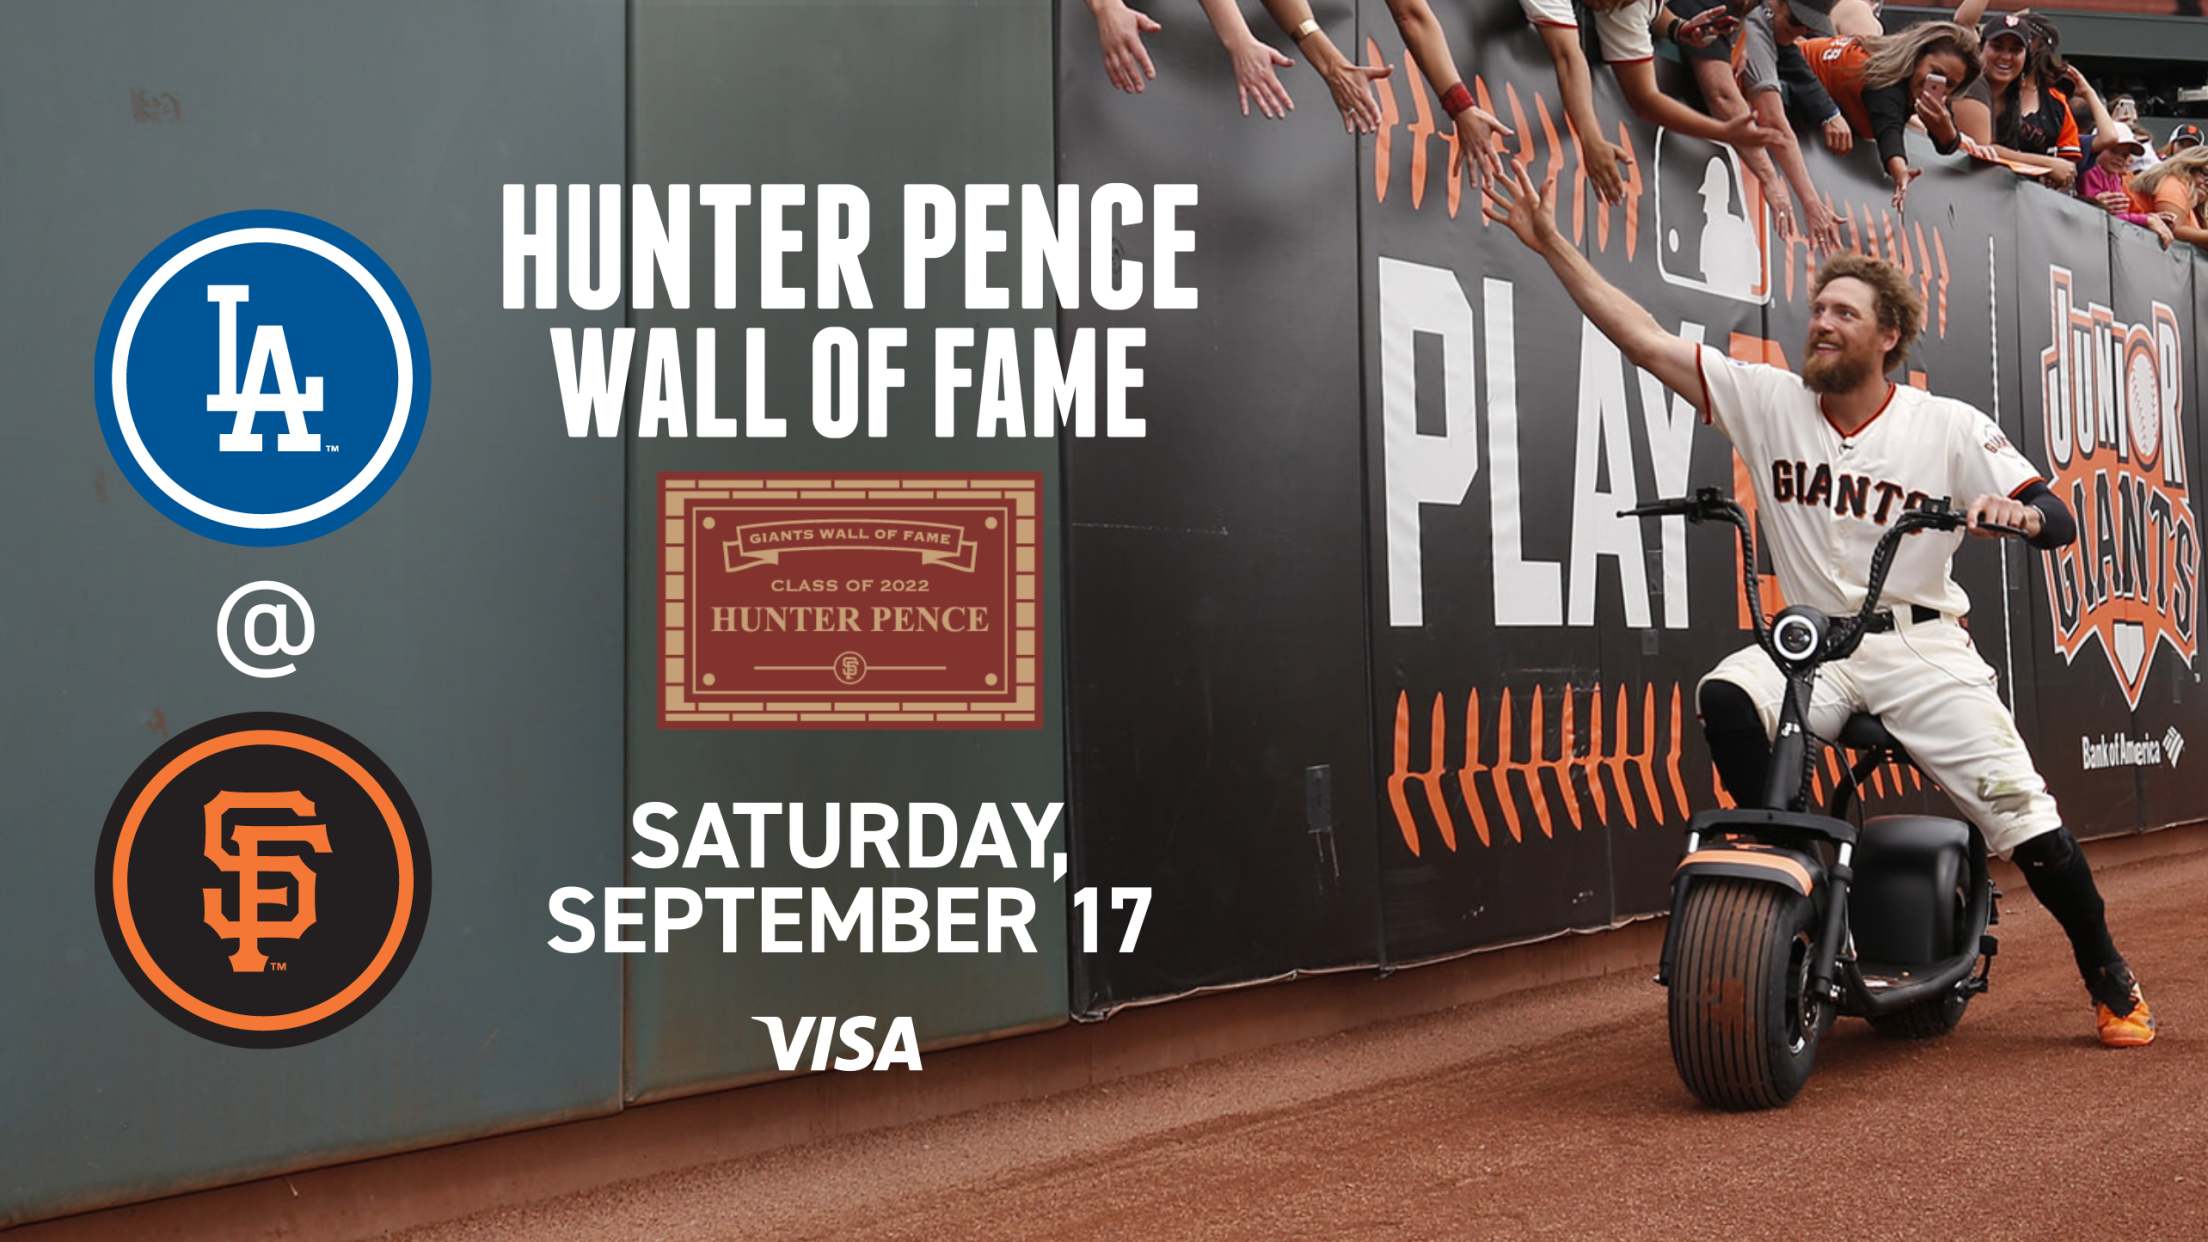 What a weekend it's been celebrating @hunterpence!